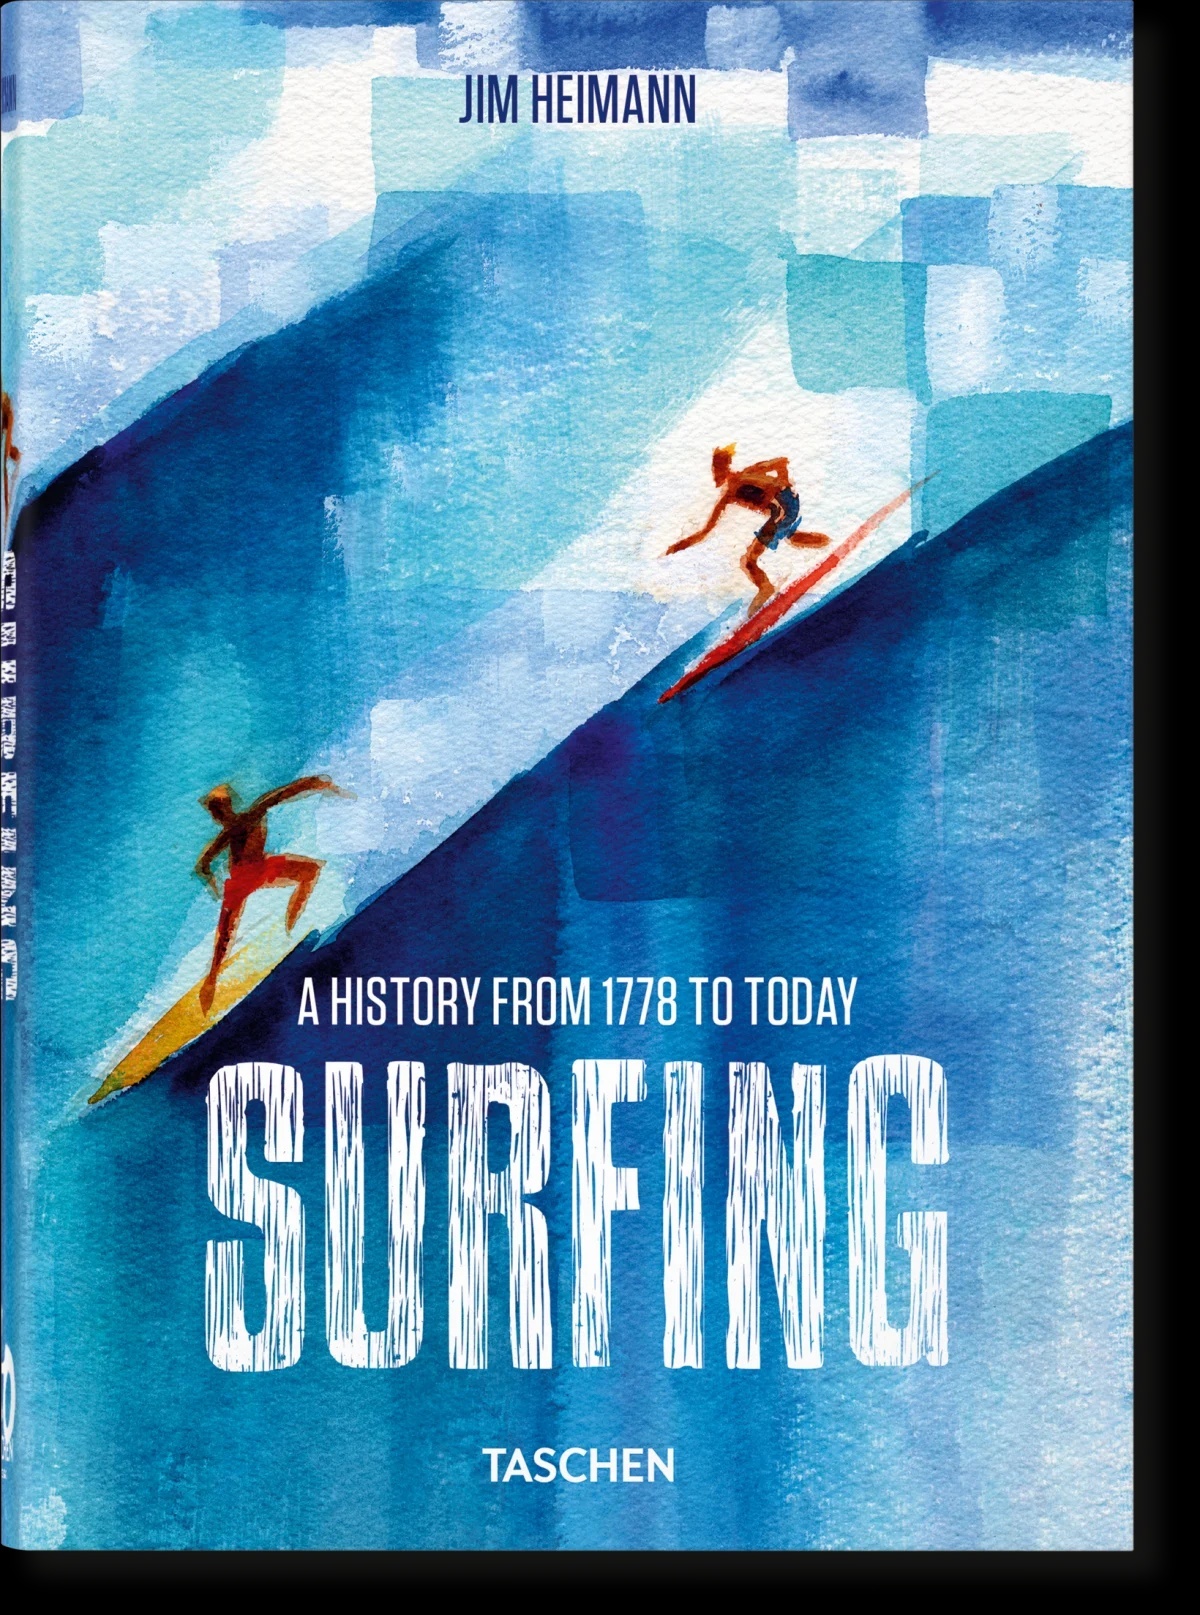 Surfing. 1778 Today. 40th Ed.